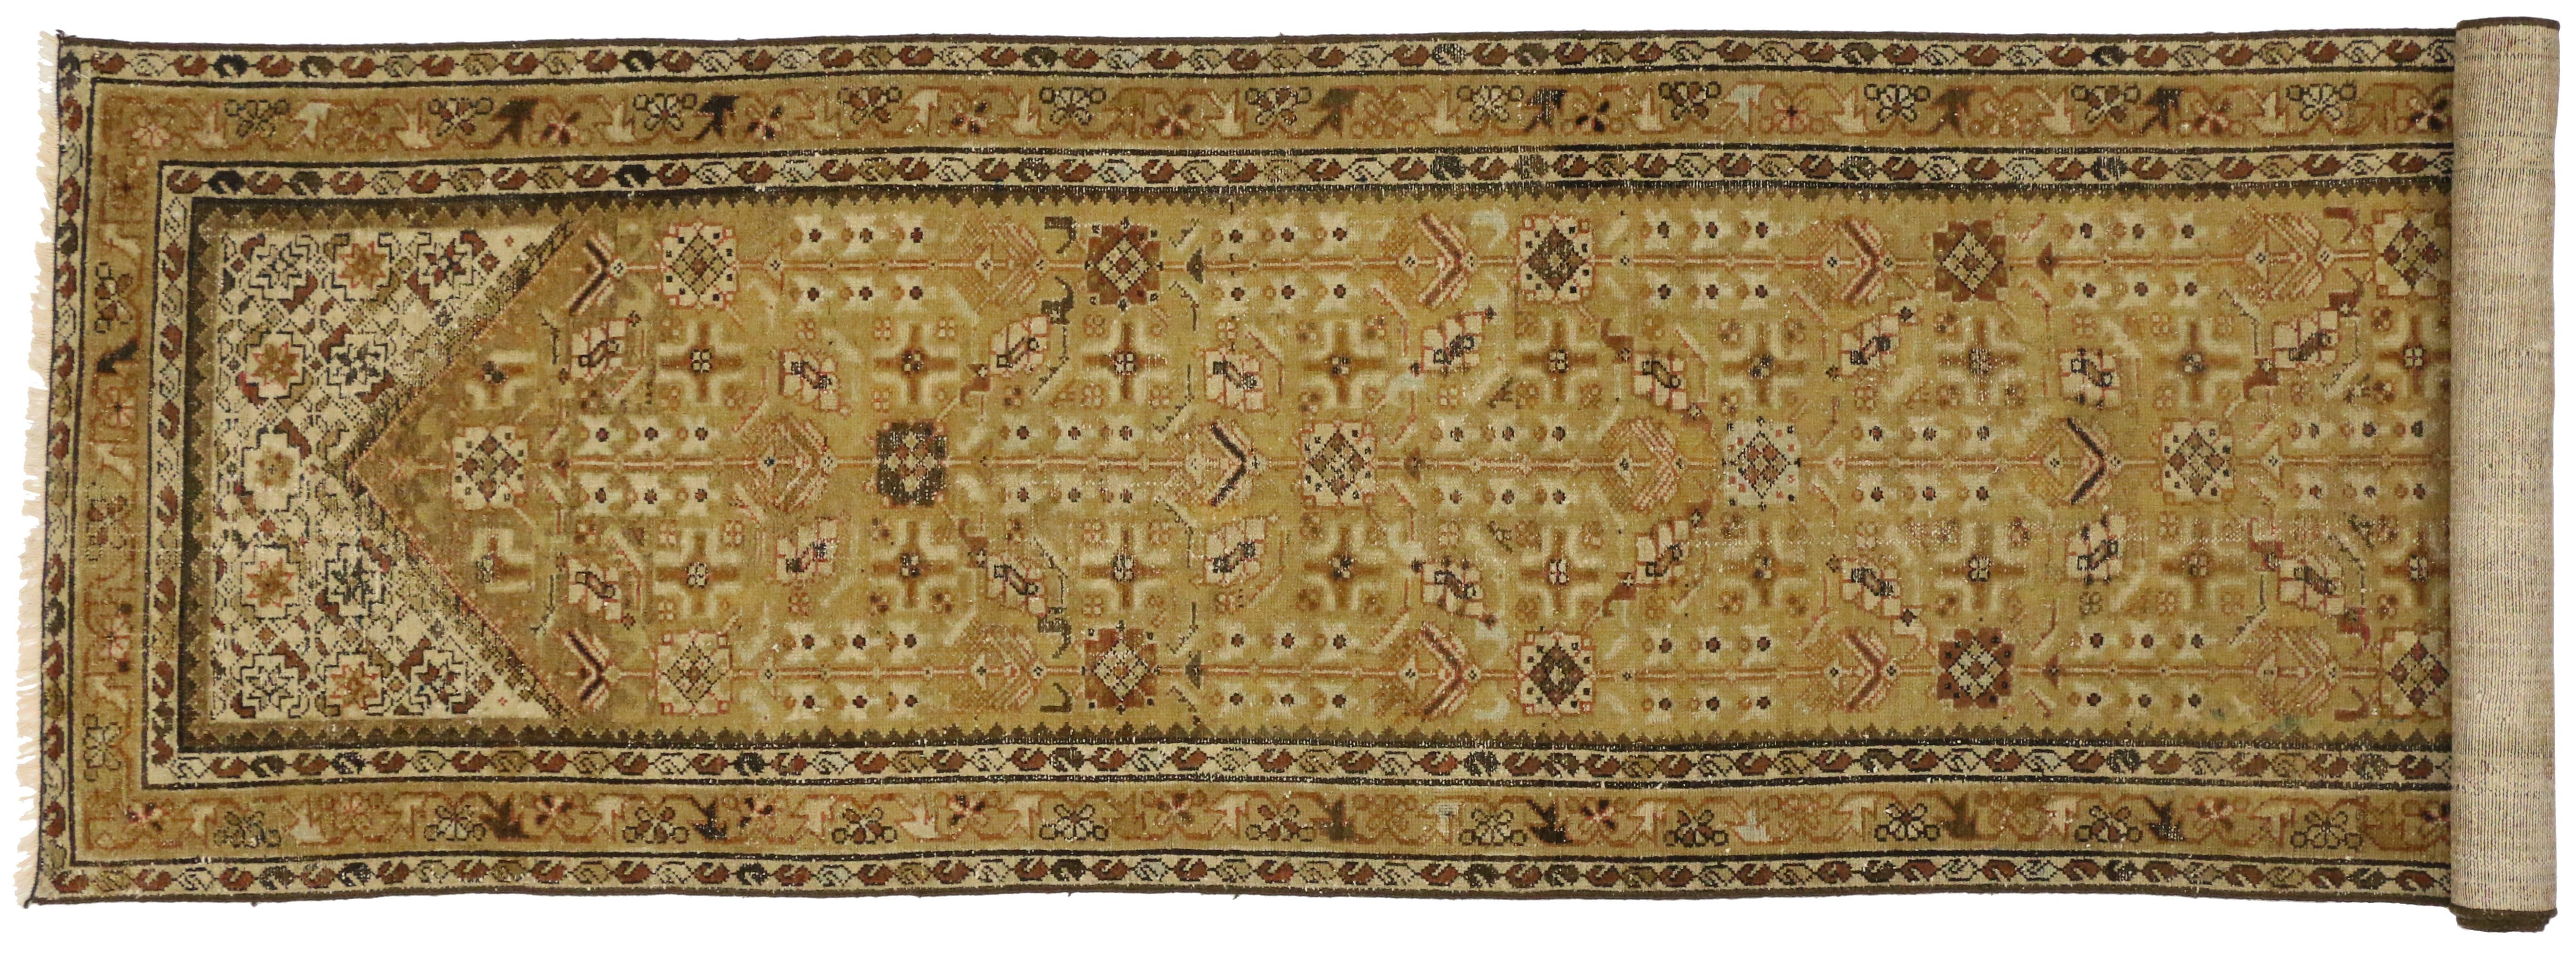 Antique Persian Malayer Rug Hallway Runner with Guli Hinnai Flower For Sale 2